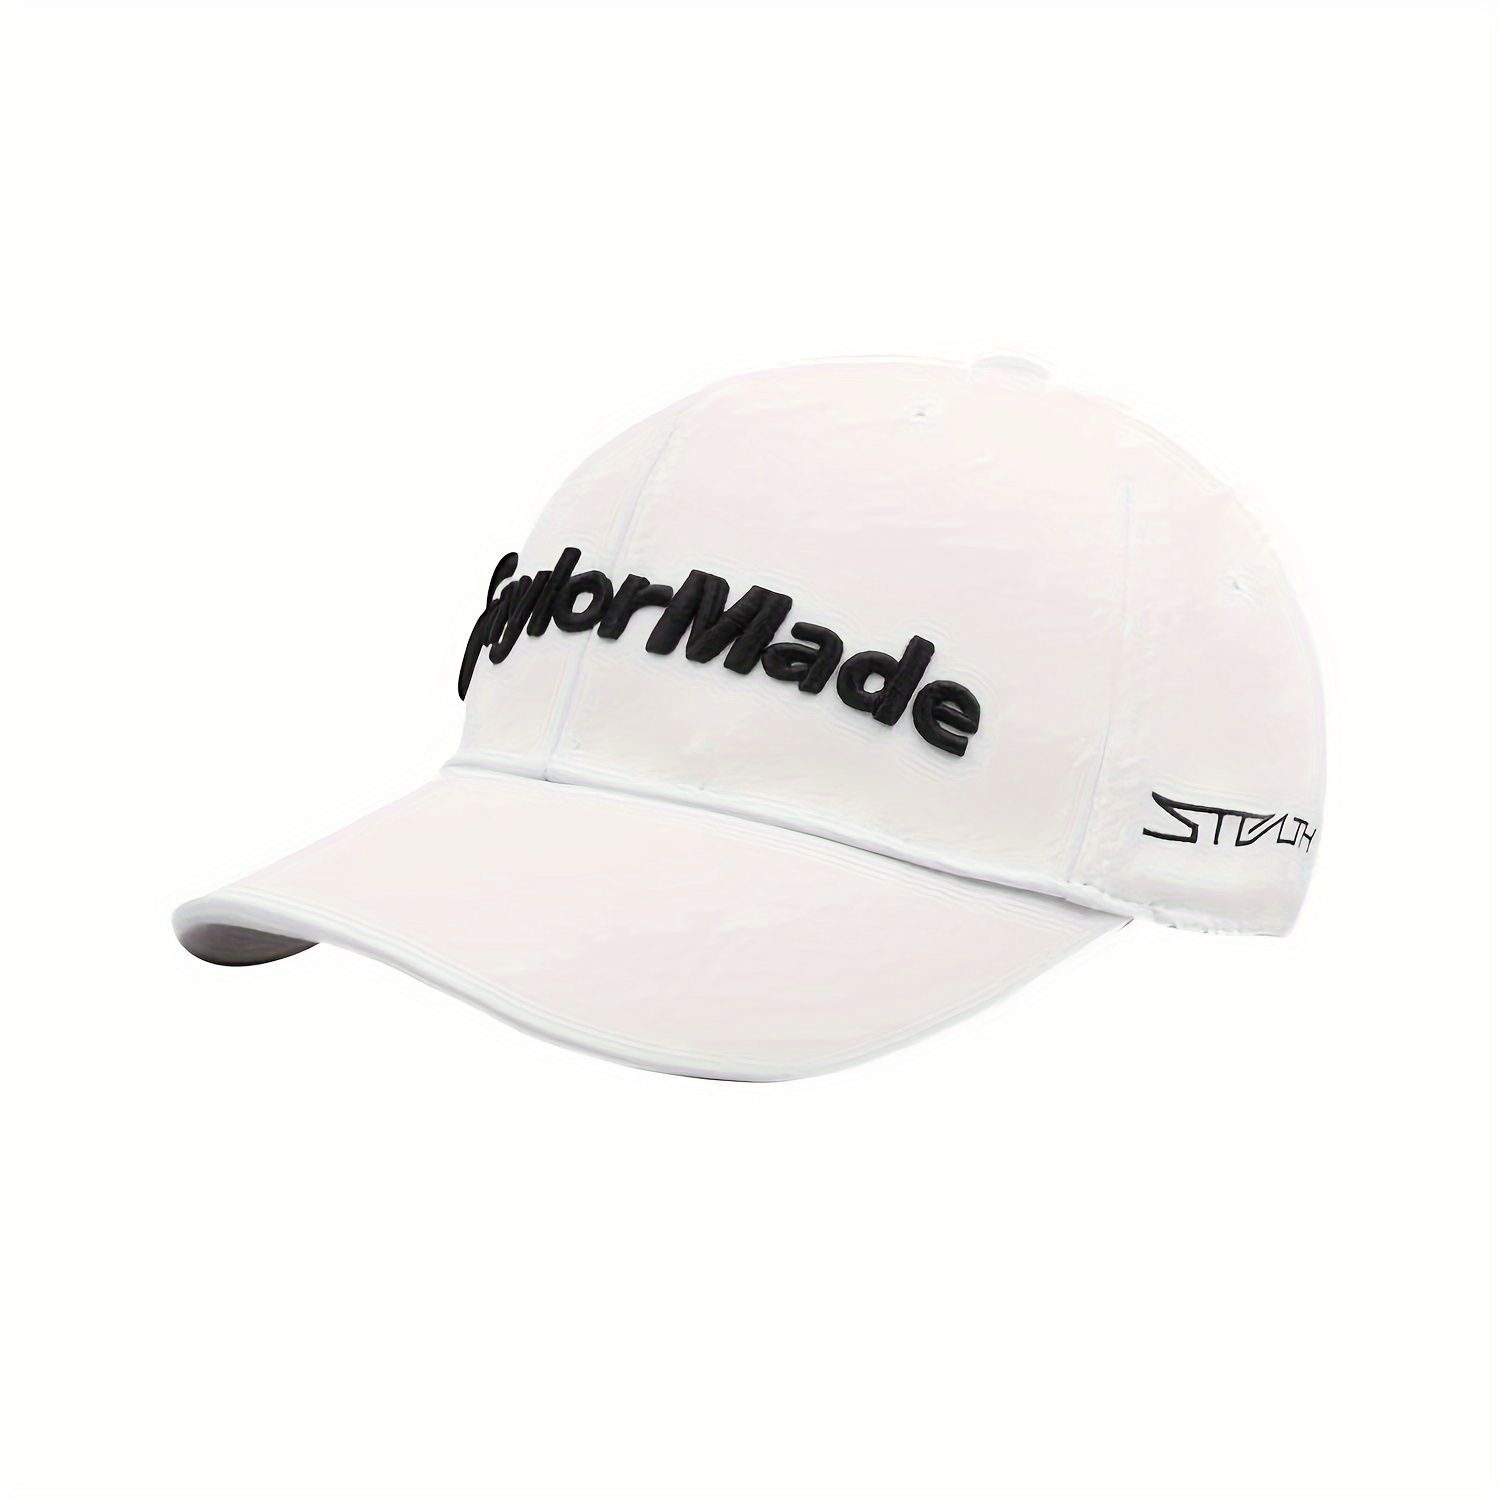 

1pc Unisex Baseball Cap With Letters Embroidered, Adjustable Peaked Hat, Ideal Choice For Leisure Time And Traveling